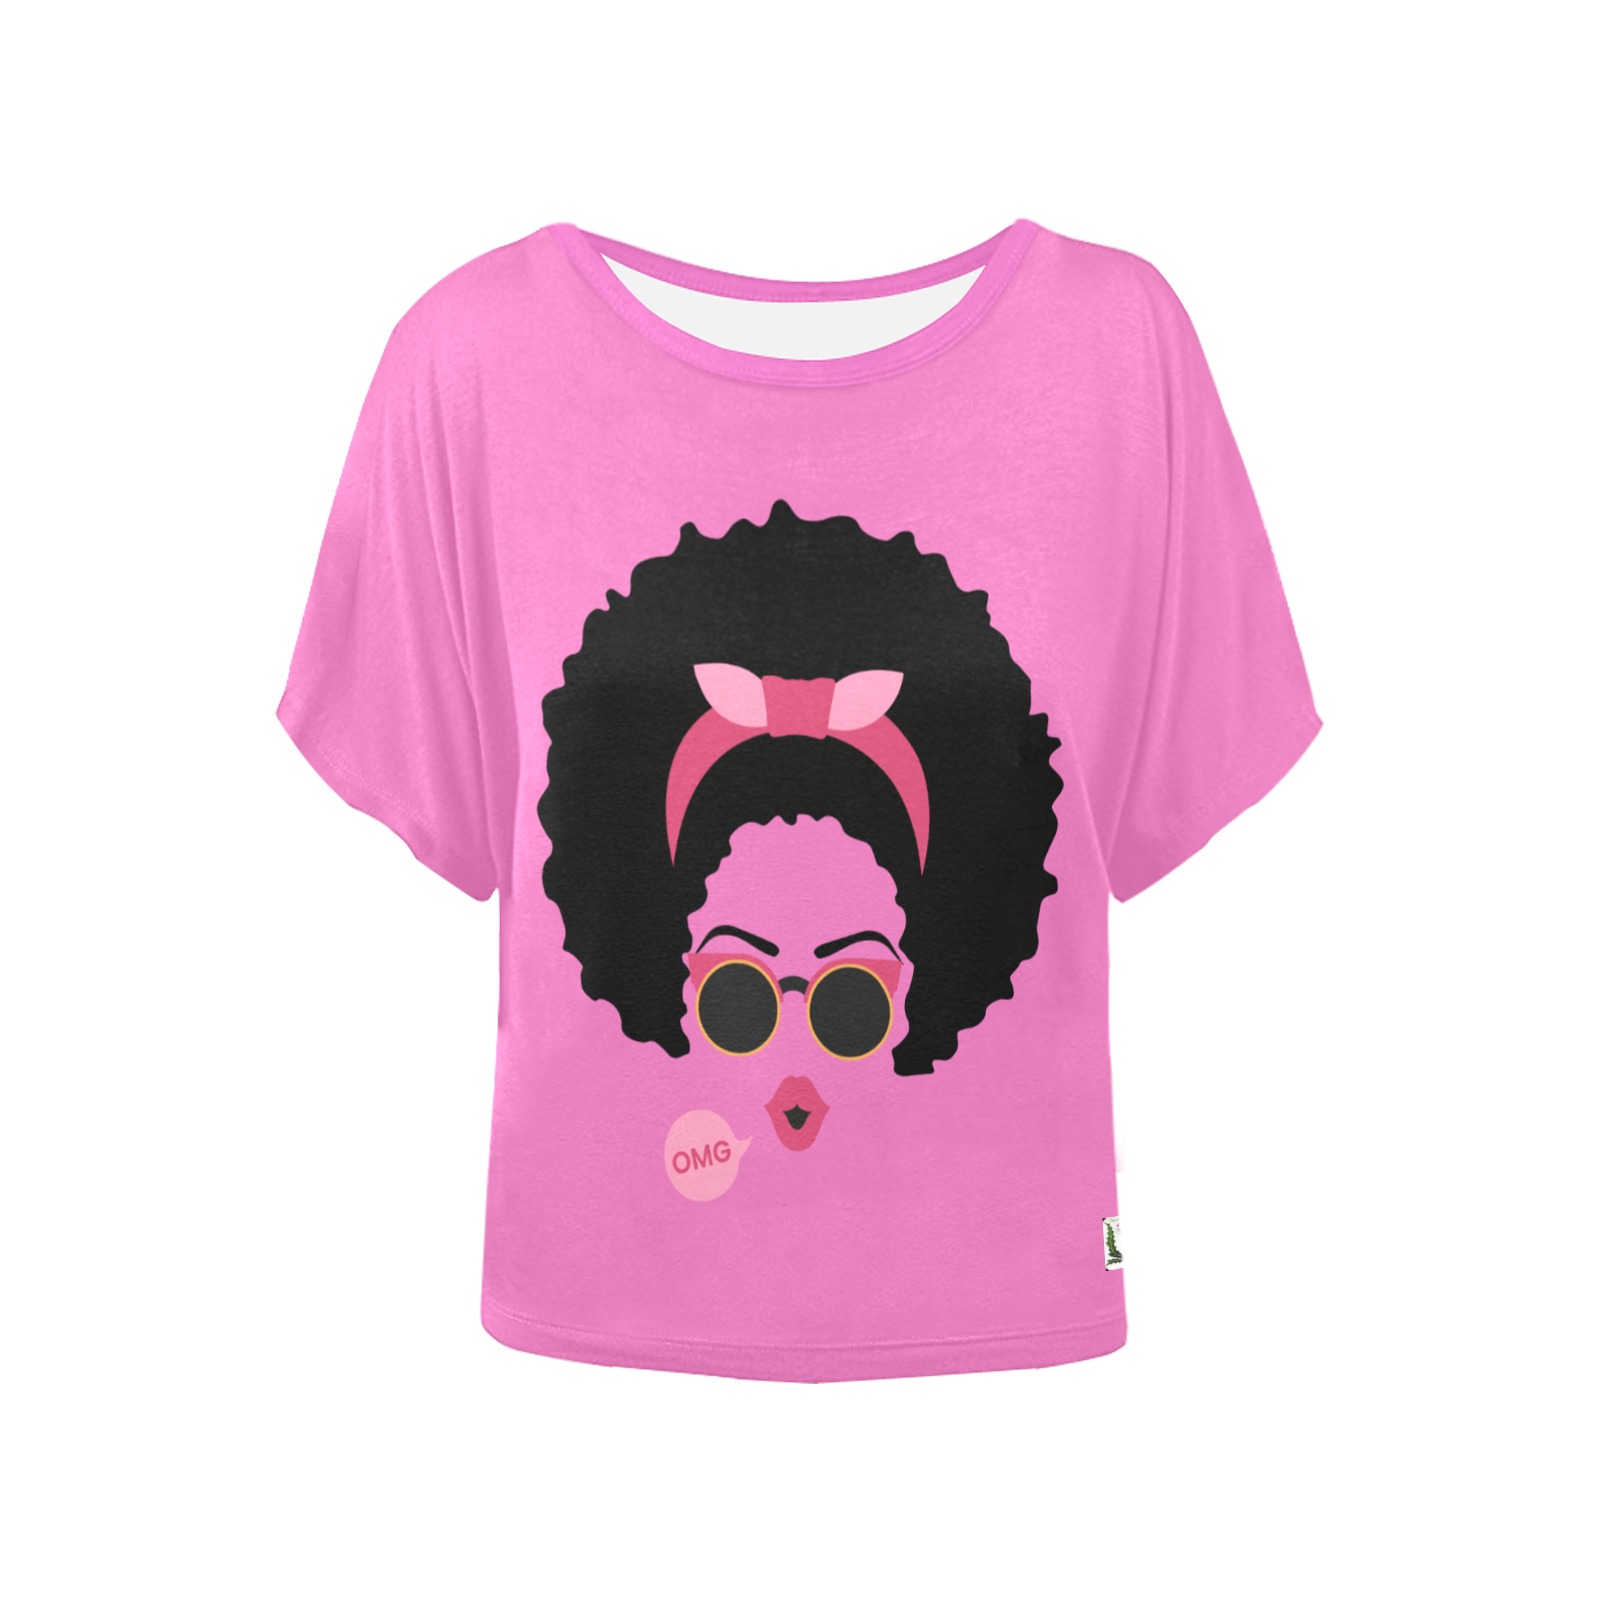 FD's Black is Beautiful Collection- Black Woman OMG in pink 53086 Women's Batwing-Sleeved Blouse T shirt (Model T44)